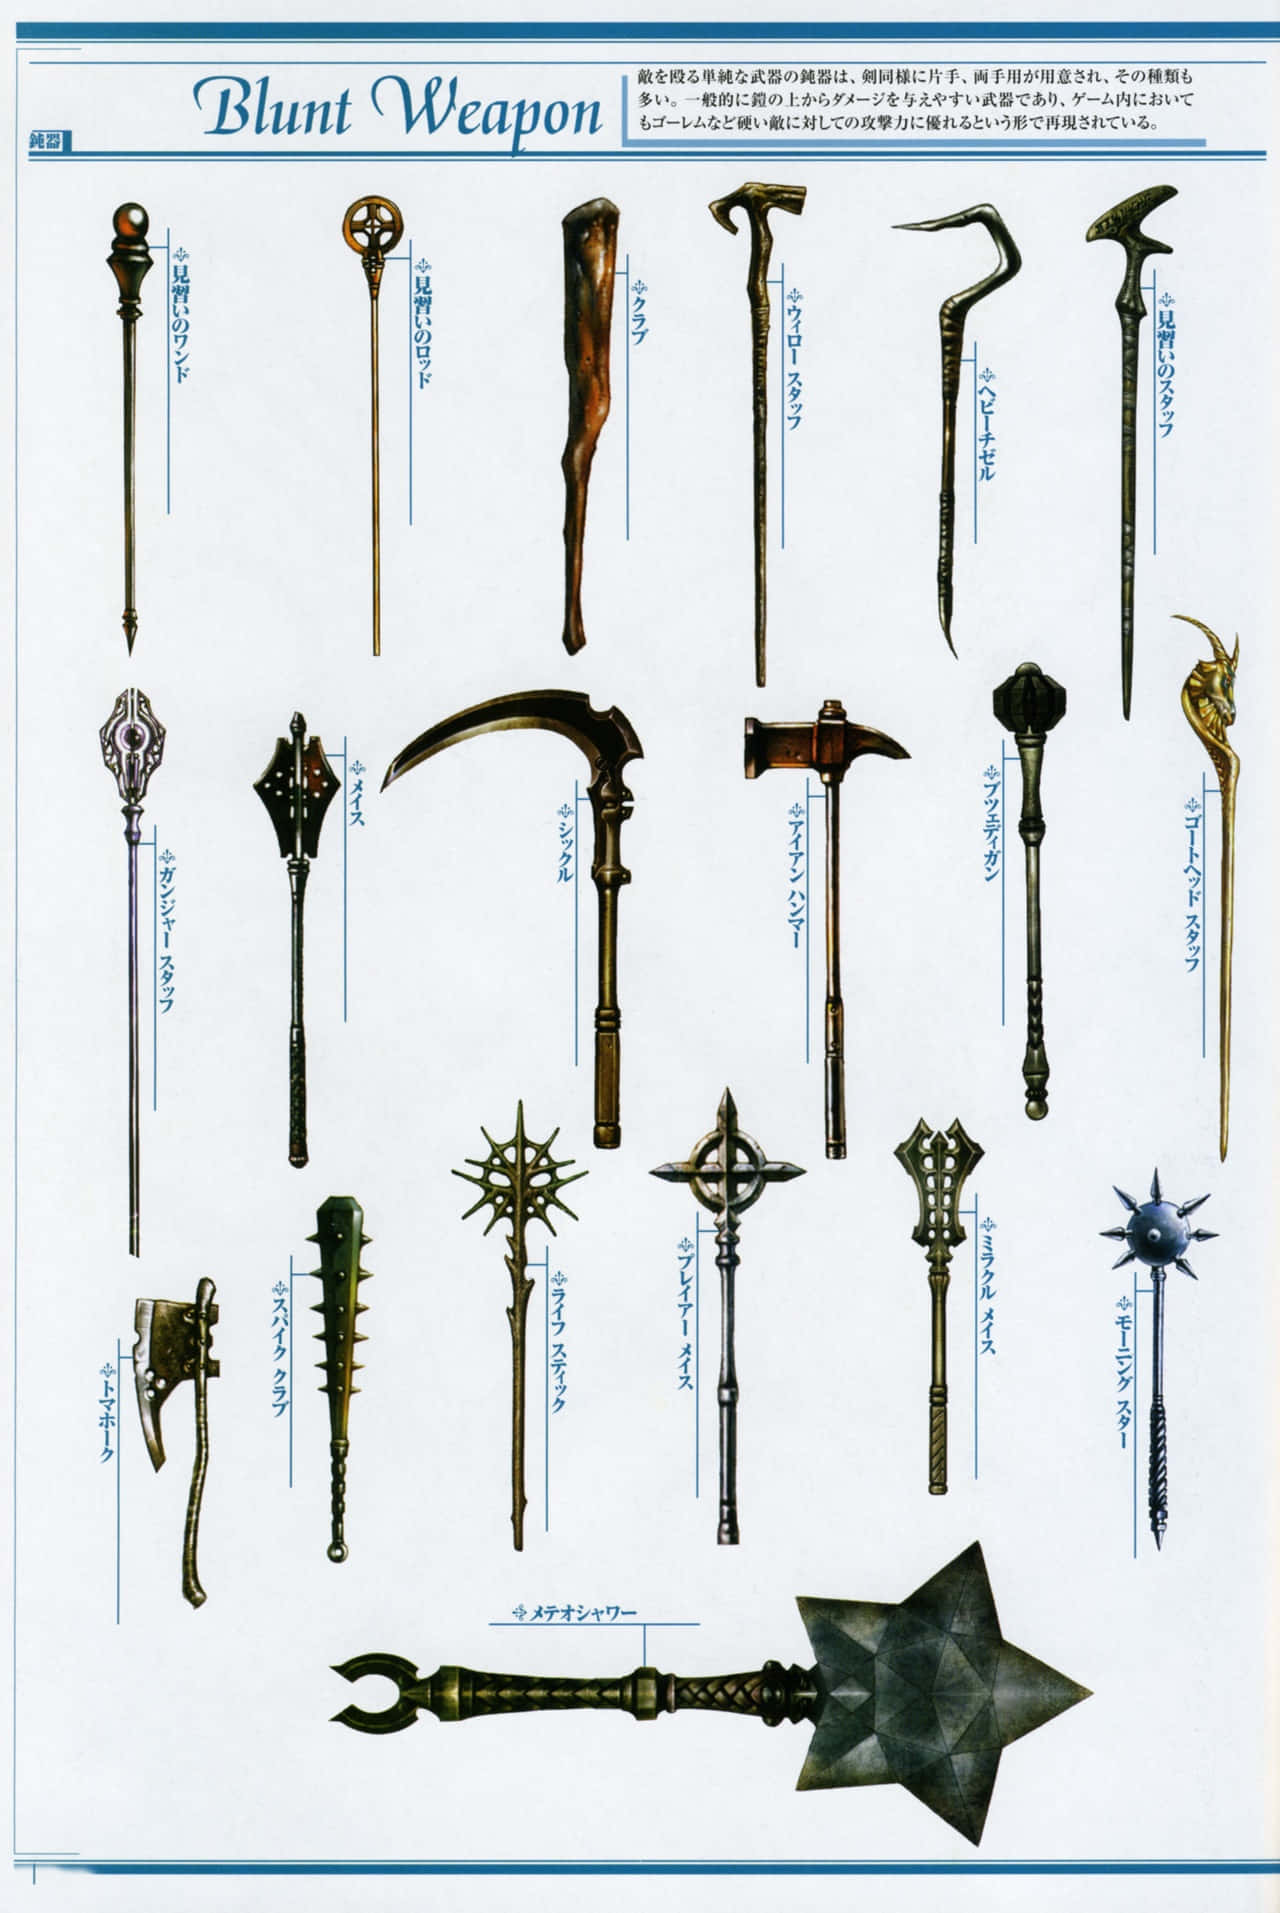 Ancient Weapons seen in Museums Wallpaper